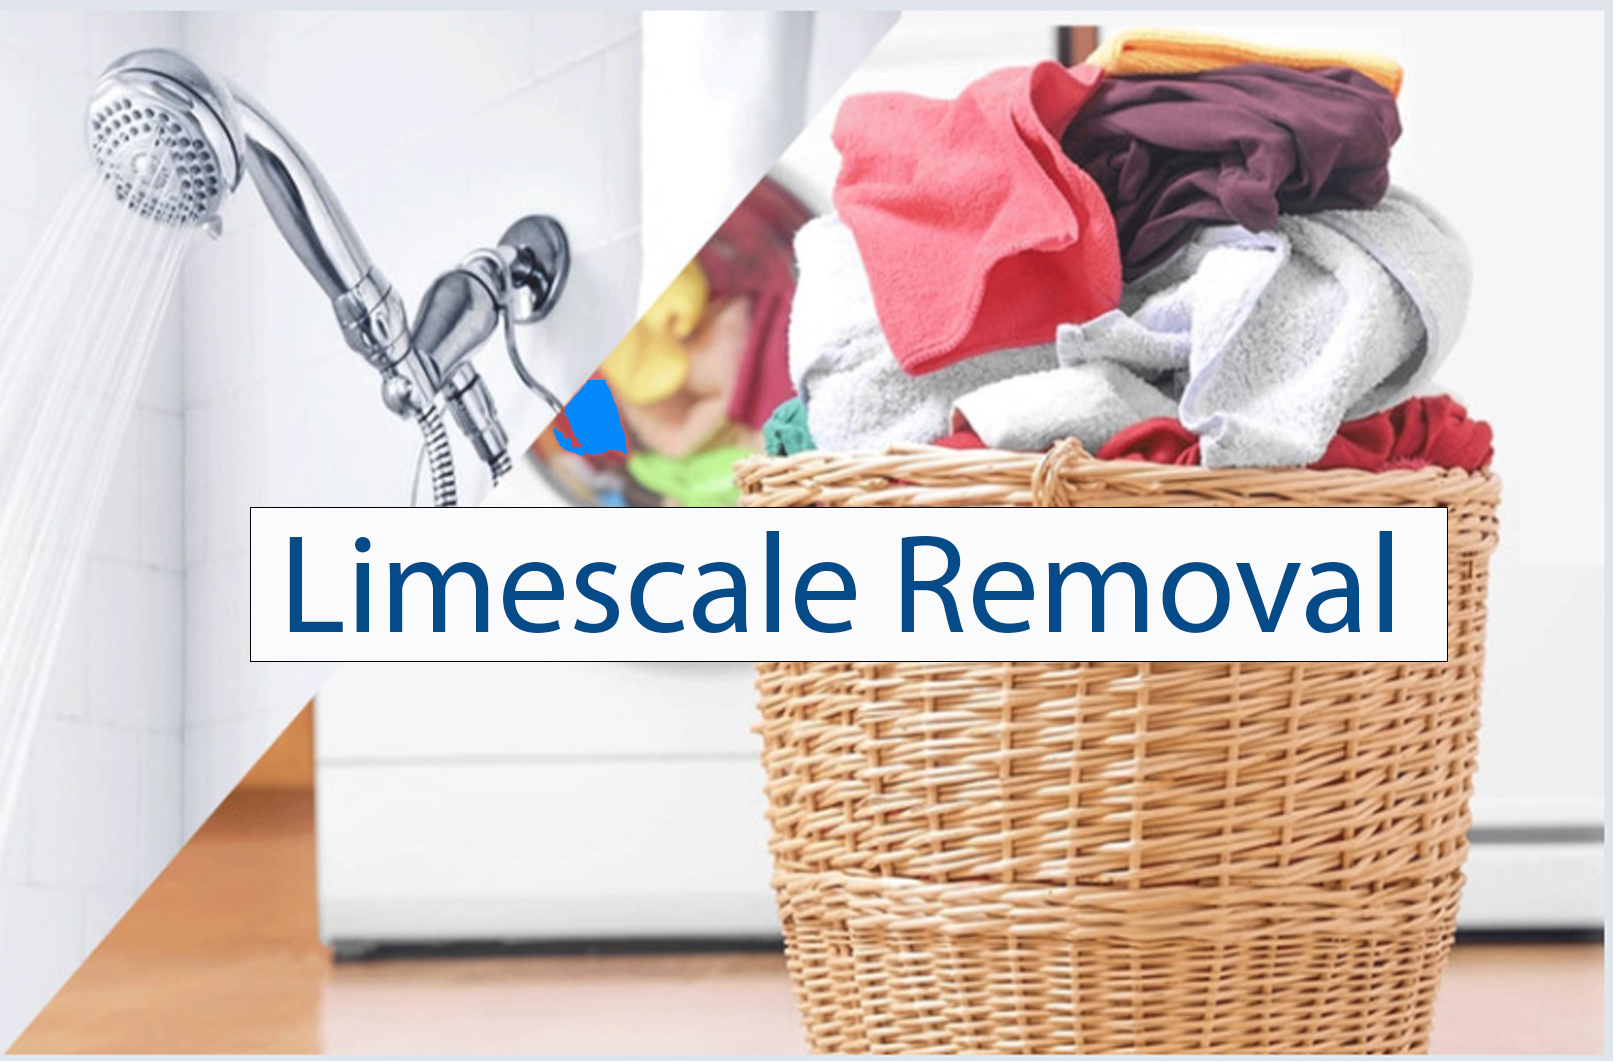 [Hard Water Problem] Save your home from Limescale